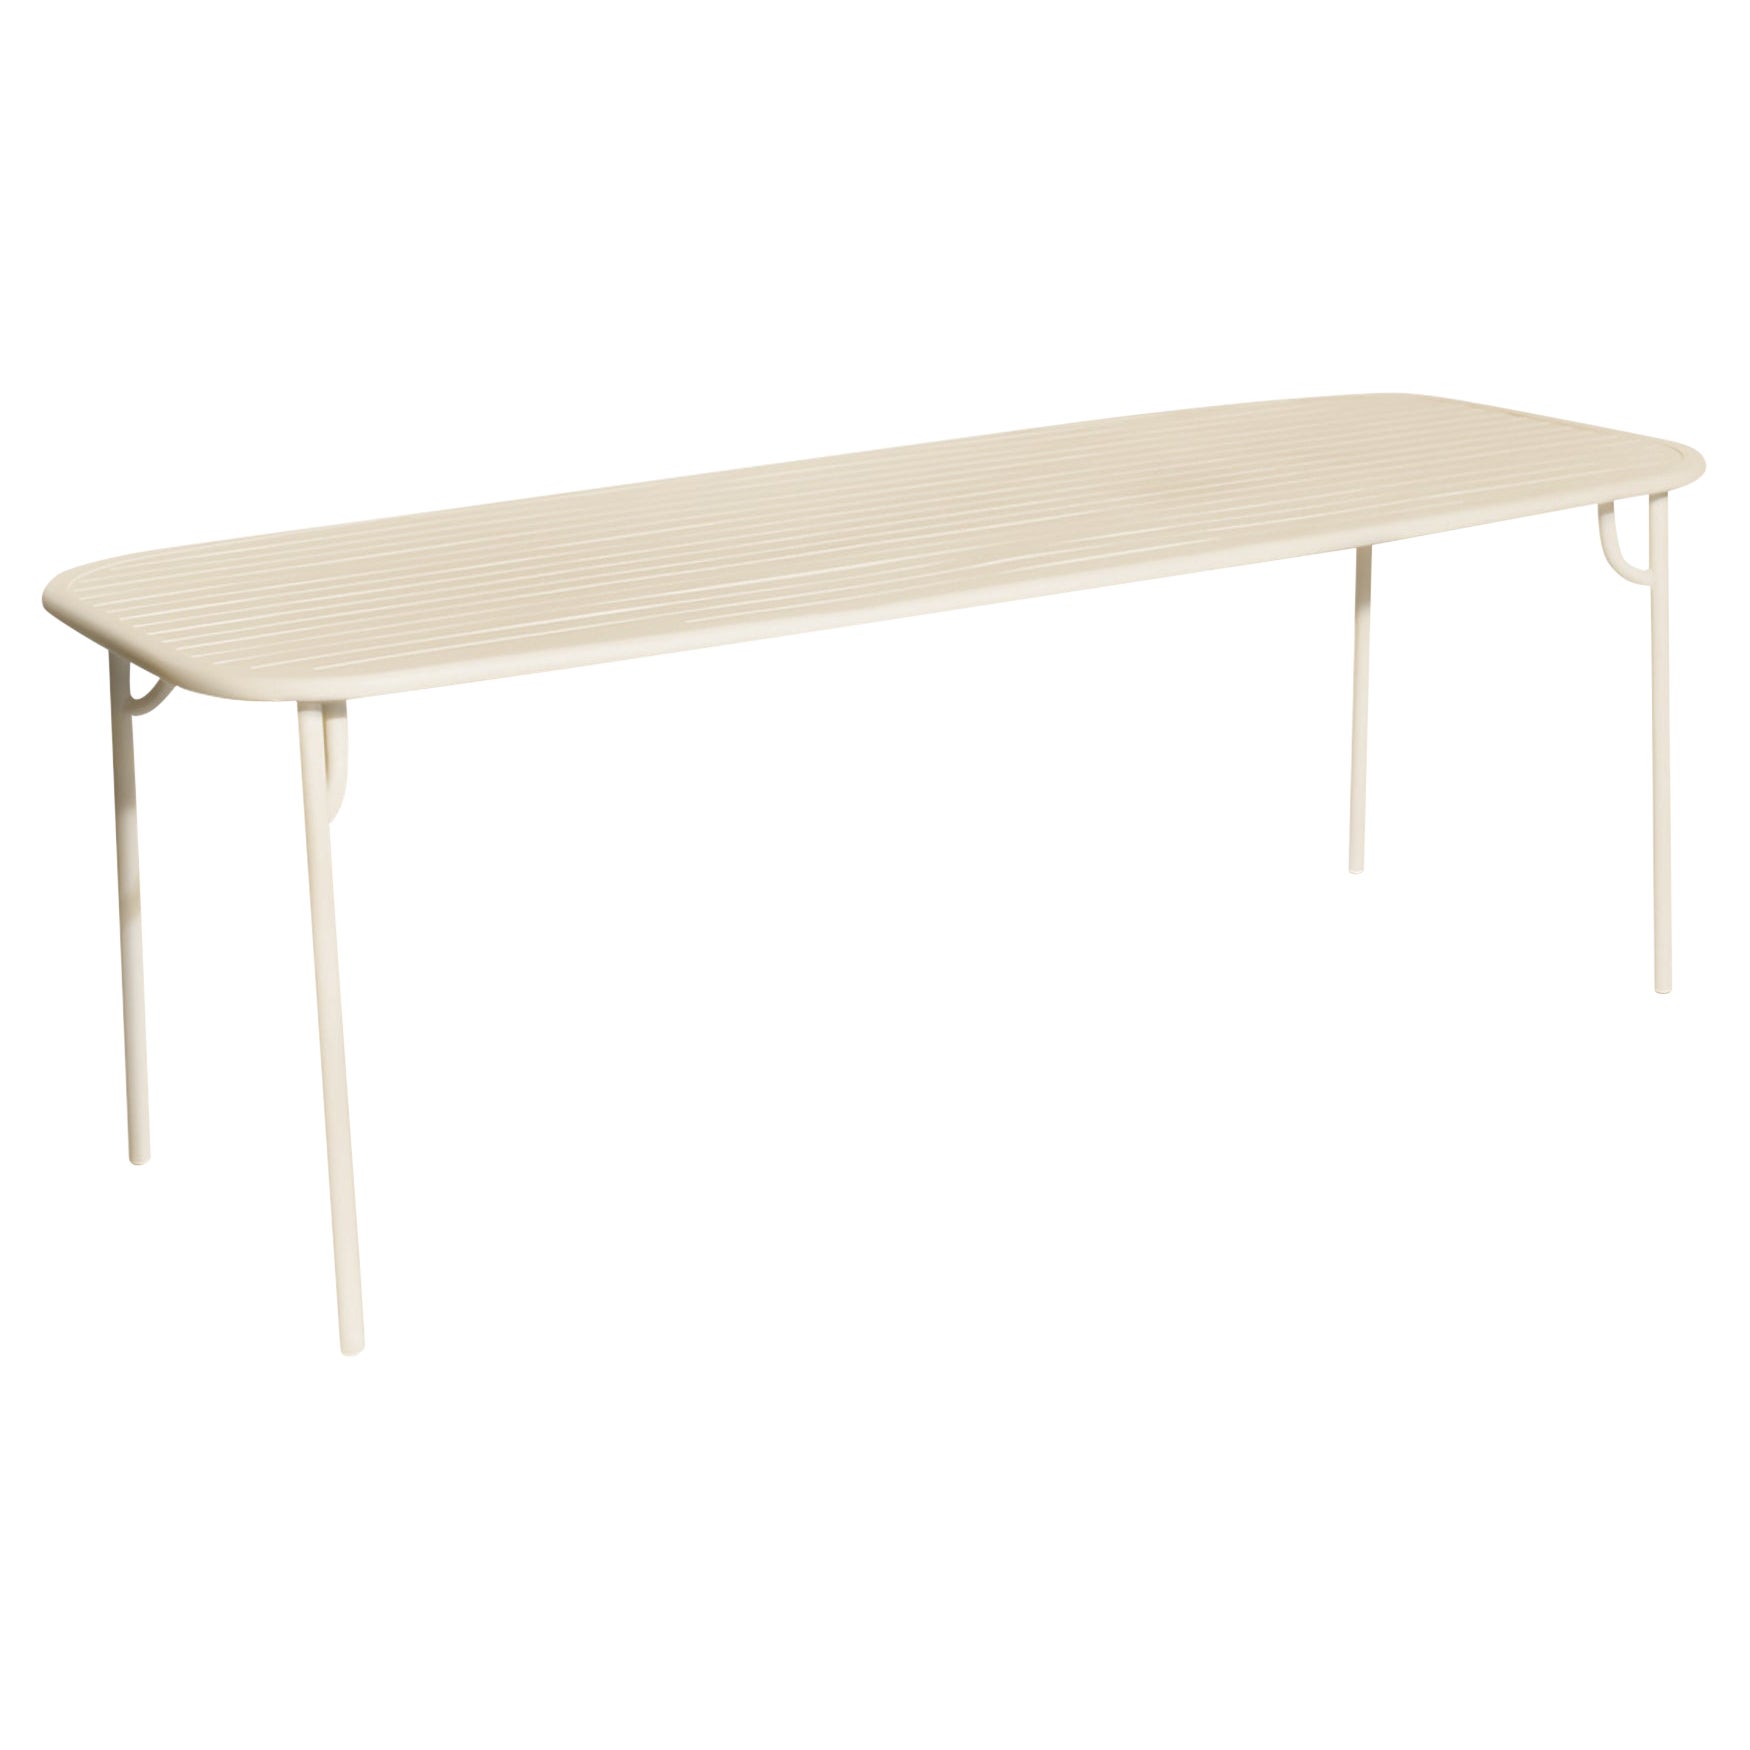 Petite Friture Week-End Large Rectangular Dining Table in Ivory with Slats For Sale